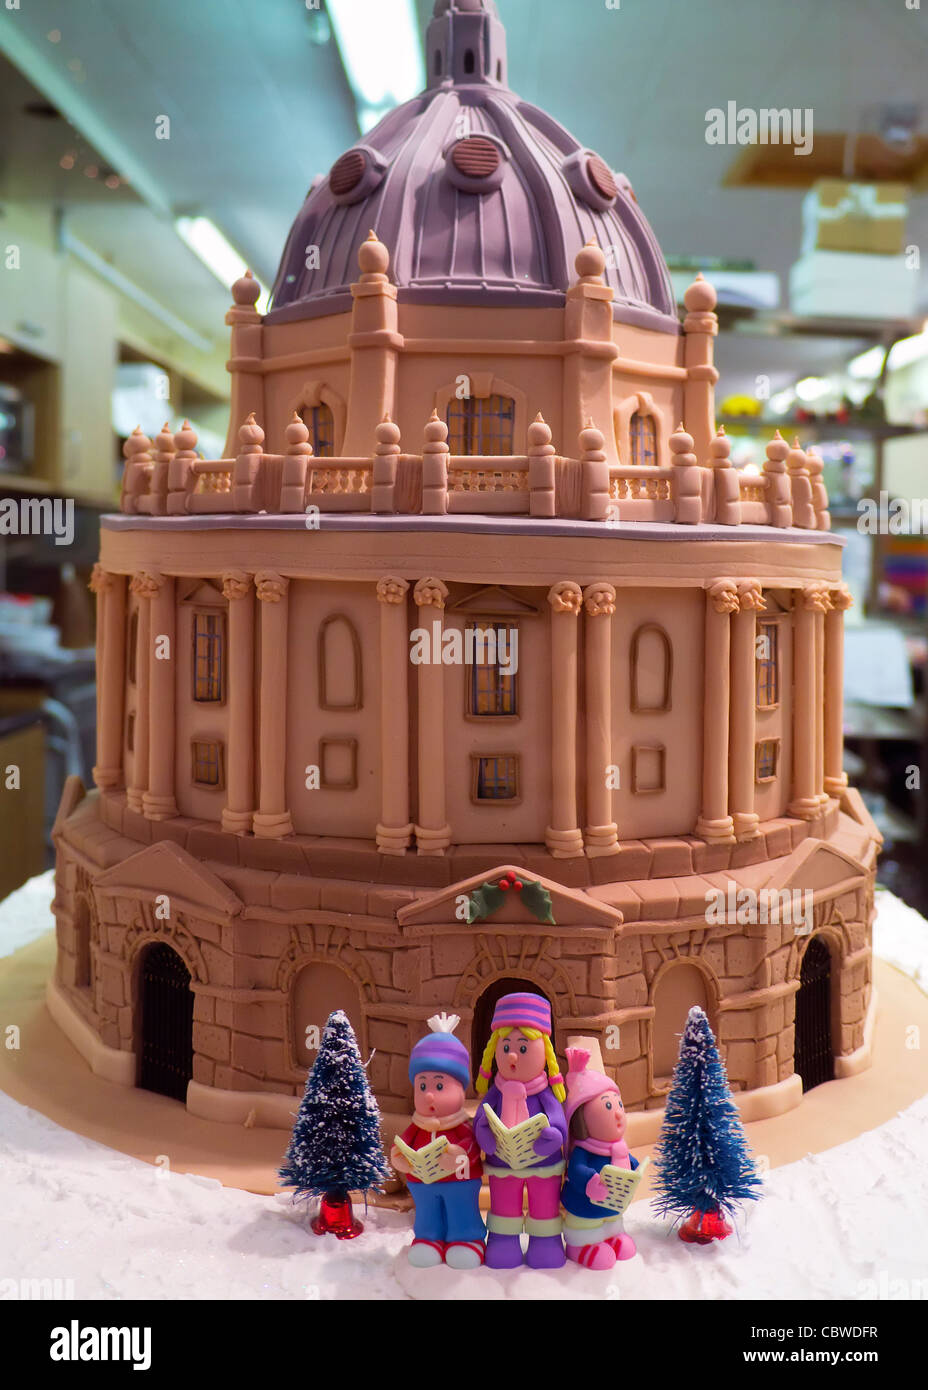 Edible Christmas cake replica of the Radcliffe Camera, Oxford, in the Covered Market Stock Photo